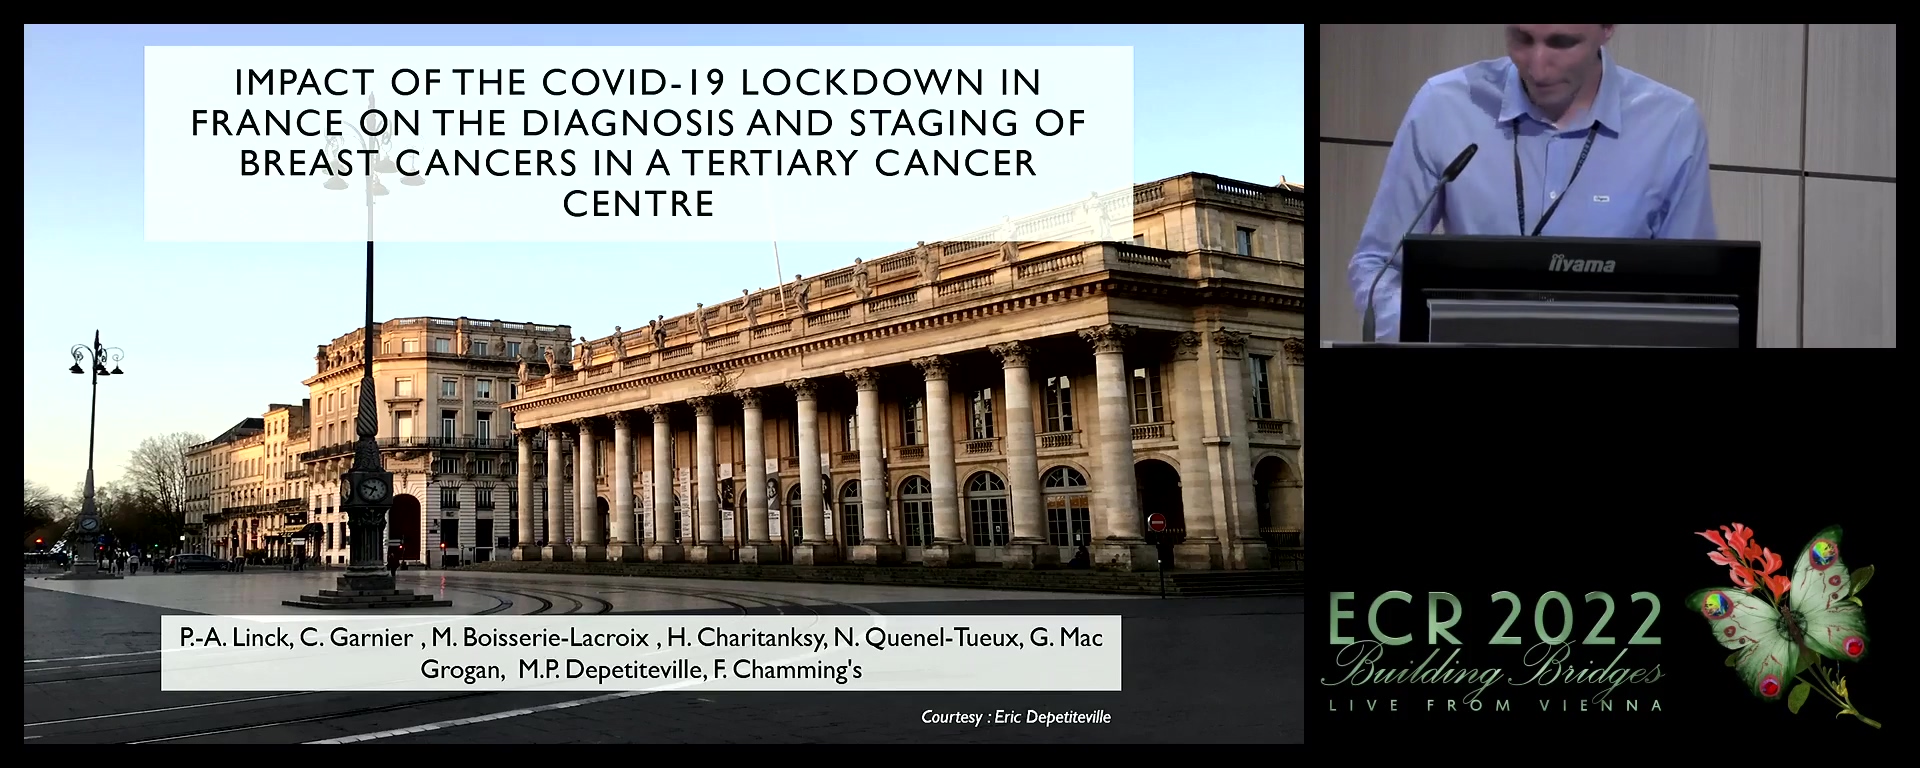 Impact of the COVID-19 lockdown in France on the diagnosis and staging of breast cancers in a tertiary cancer centre